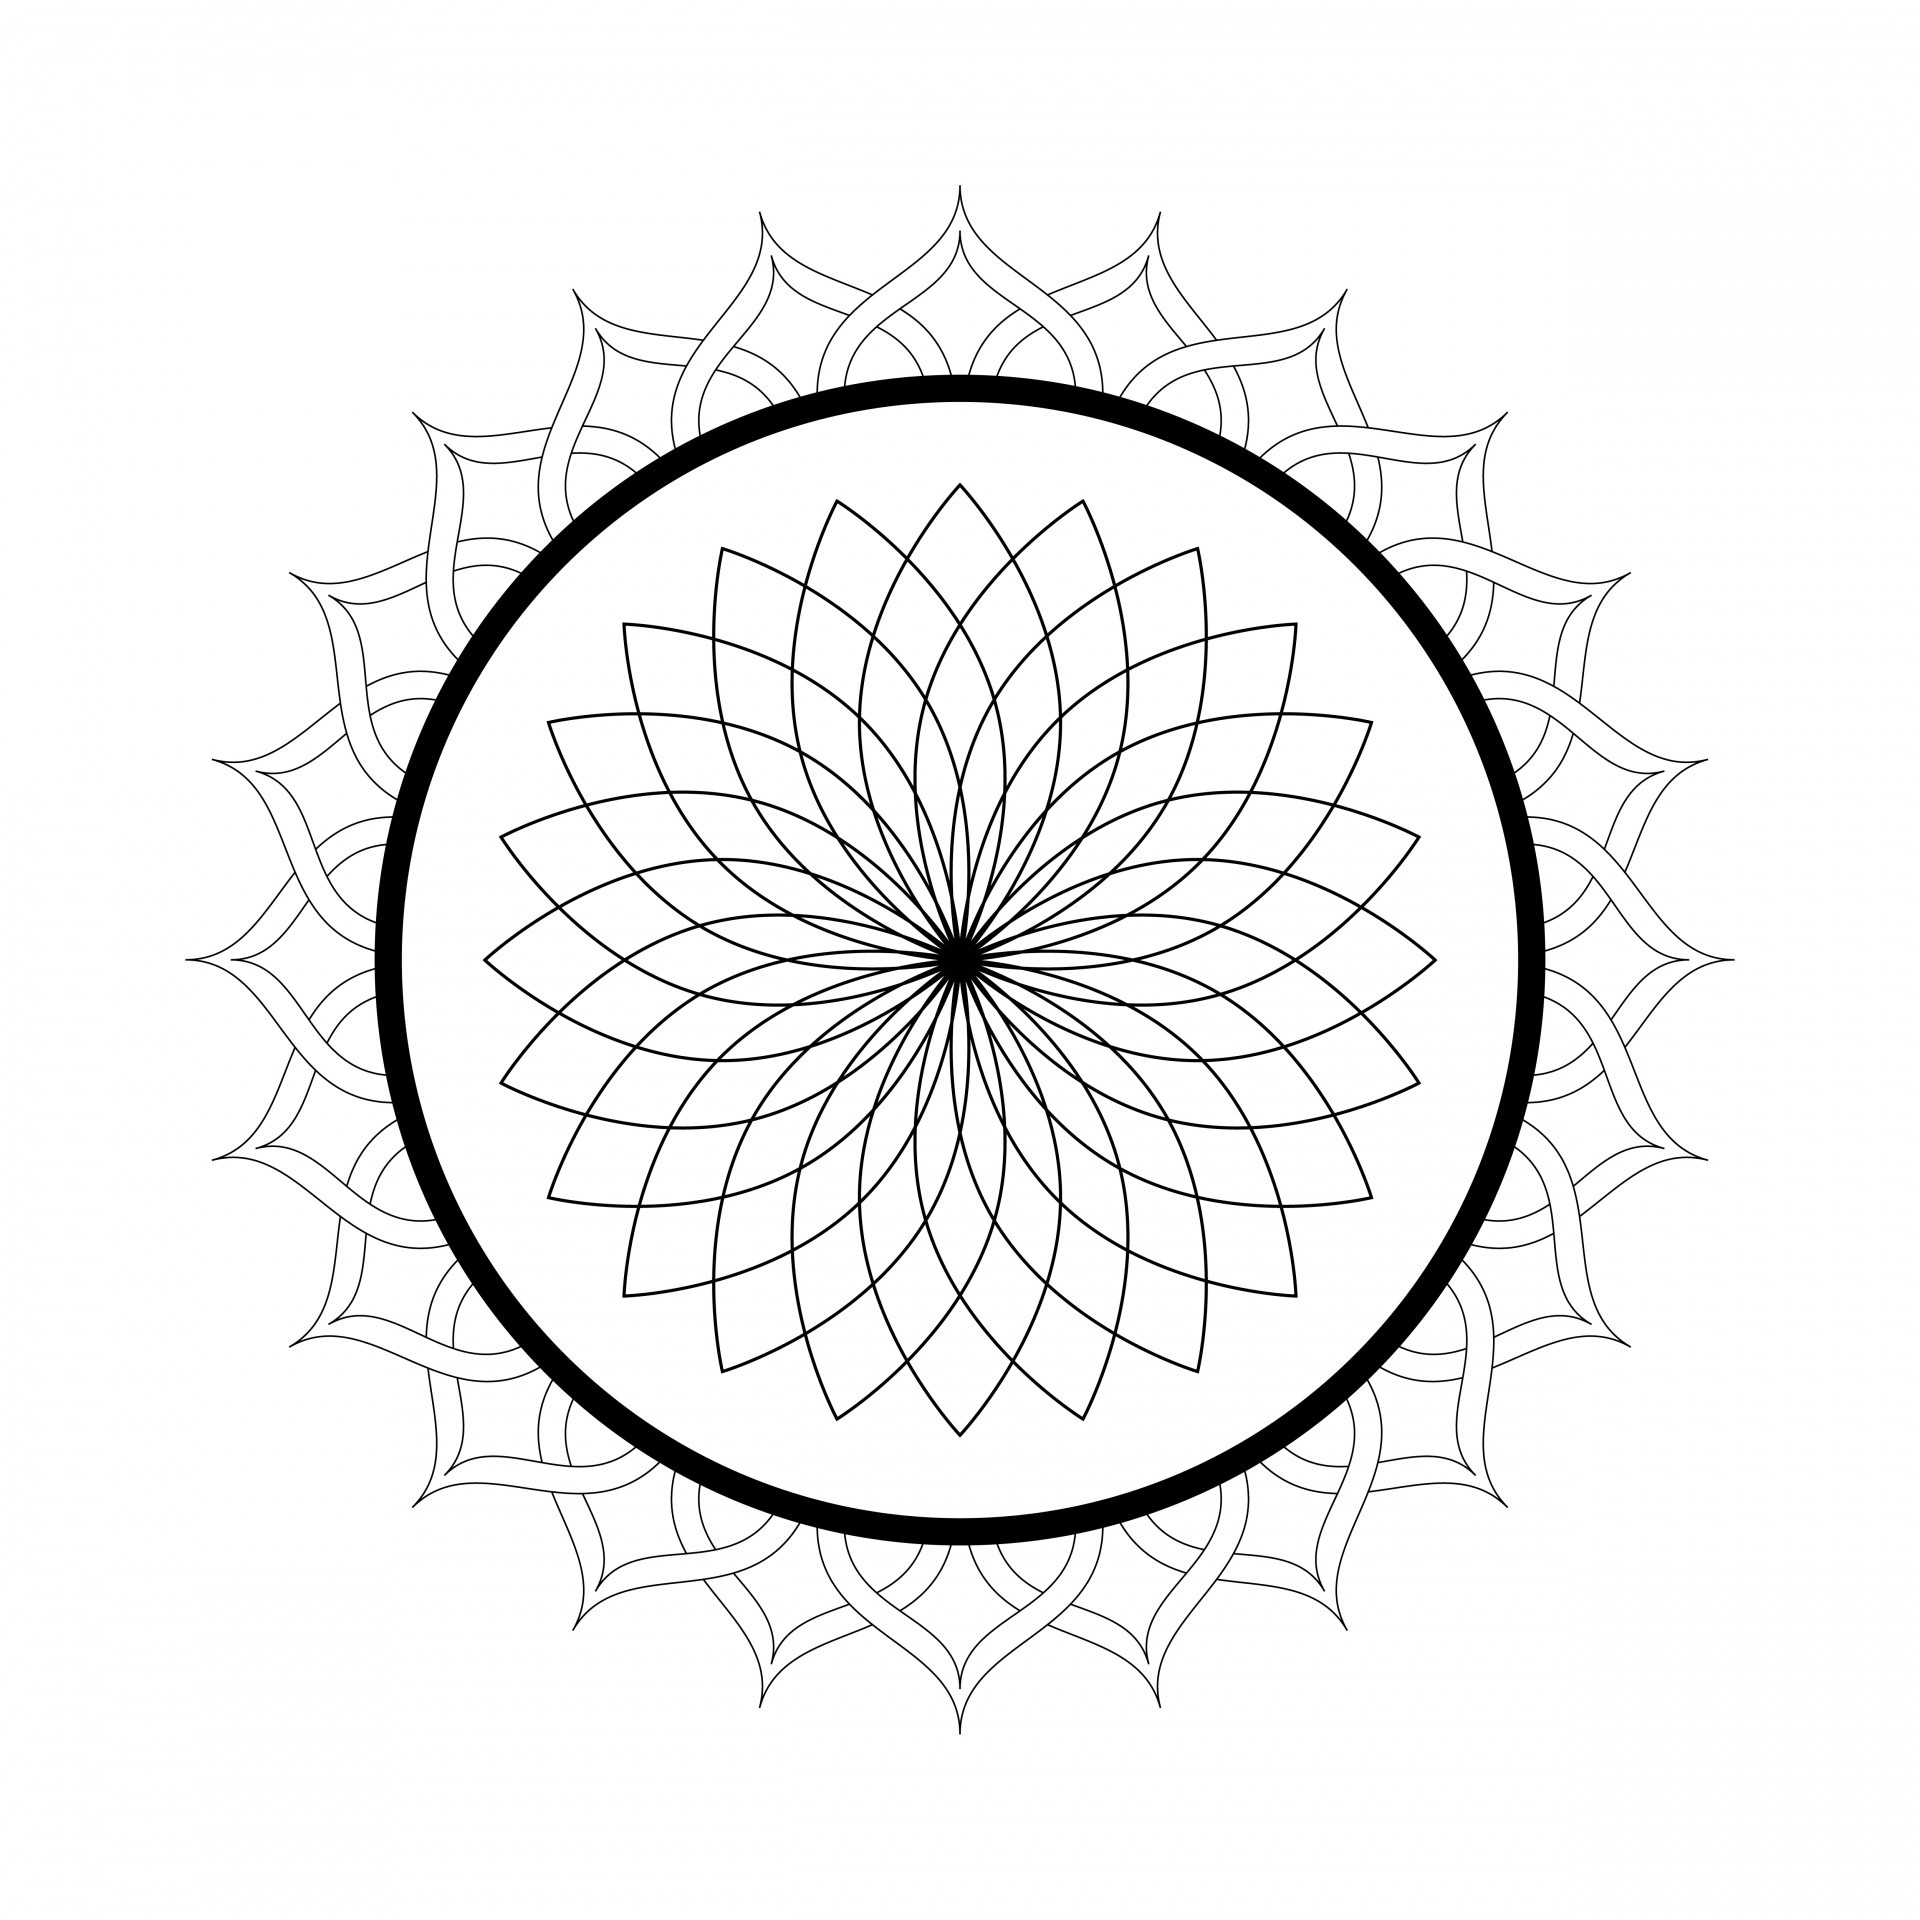 Free Mandala Coloring Pages For Kids
 Free Printable Mandala Coloring Pages For Adults Best